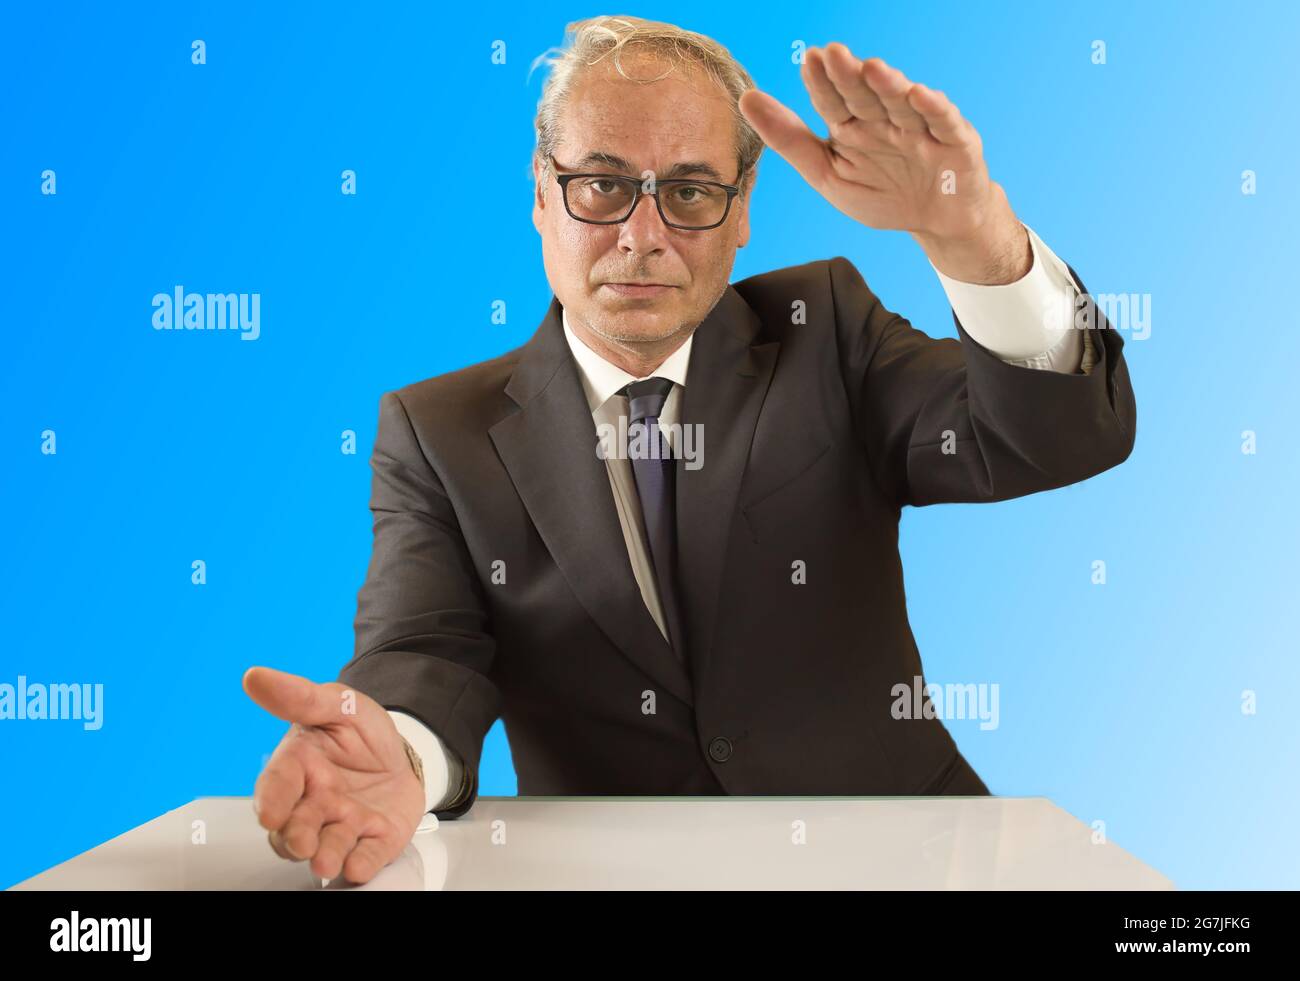 businessman with open arms looking confidently in front with blue background Stock Photo